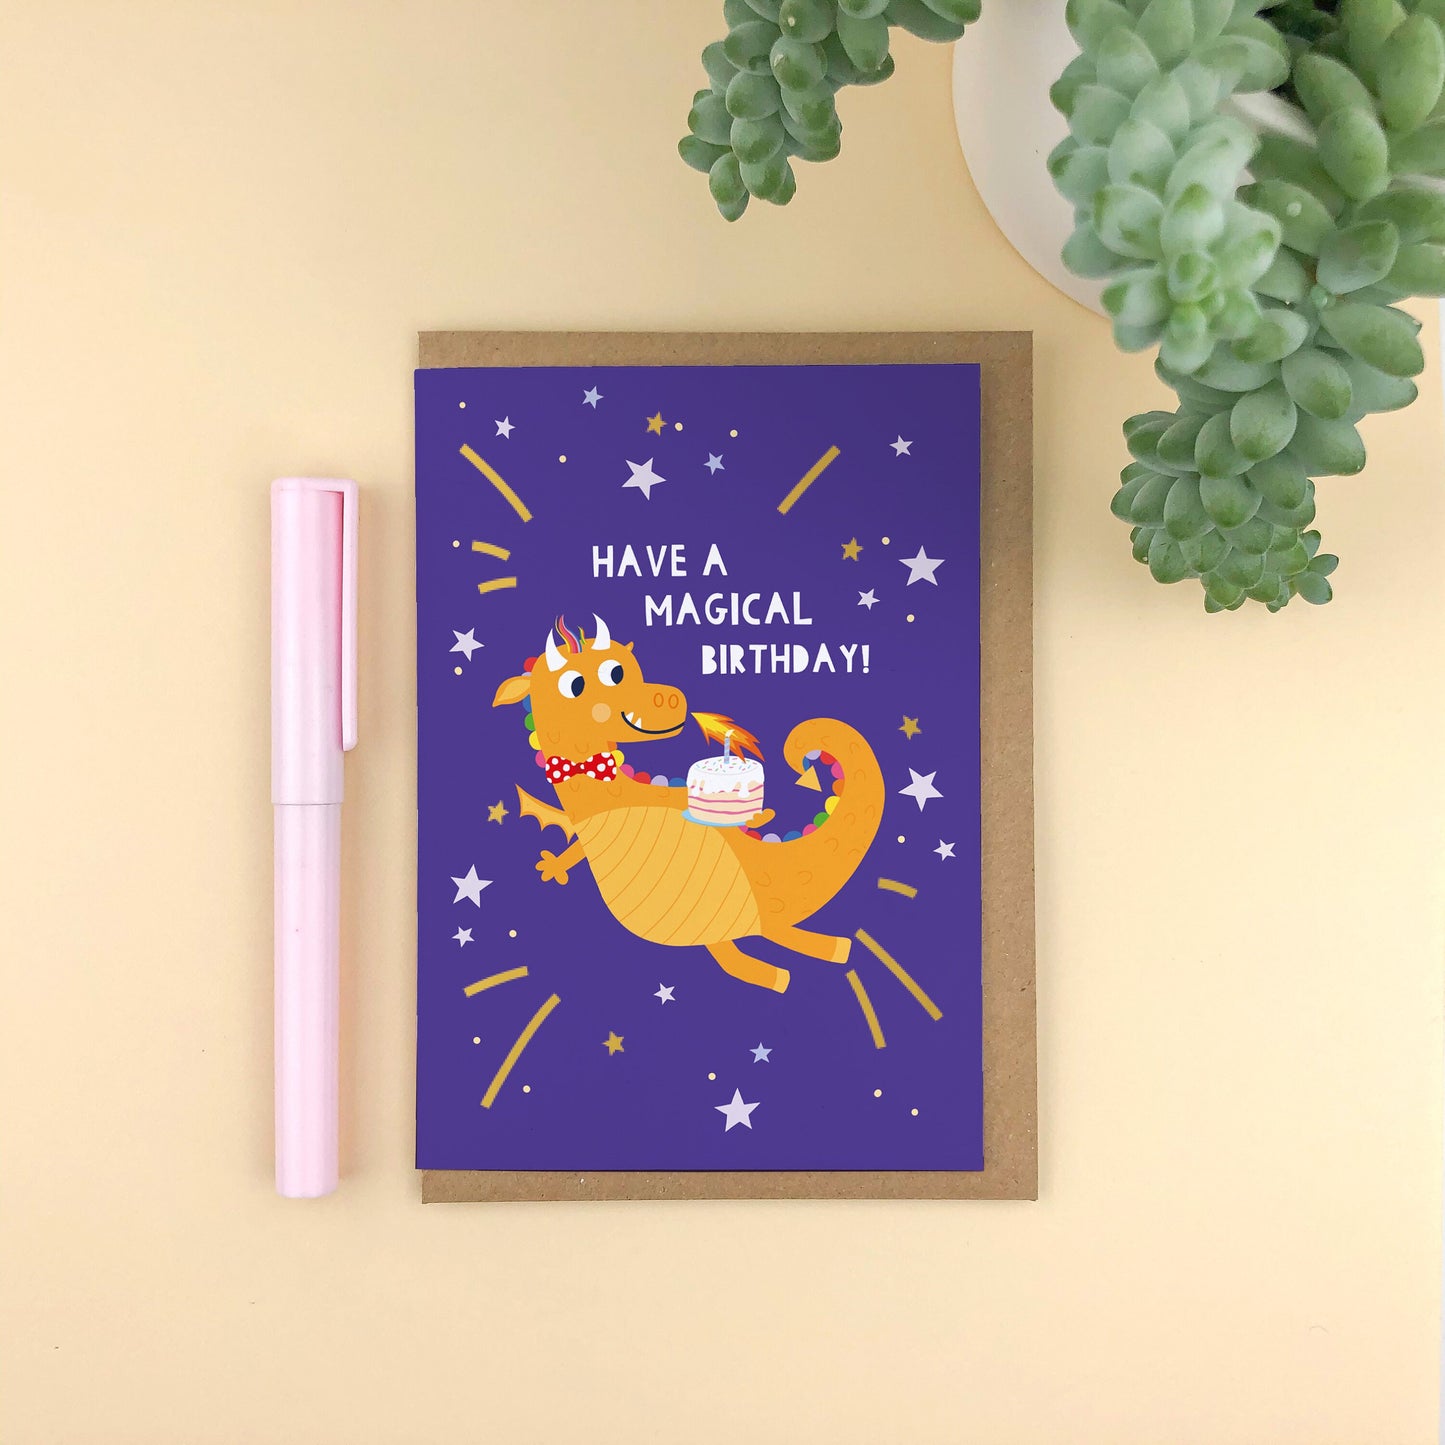 Have a Magical Birthday Gold Foiled Children's Birthday Card